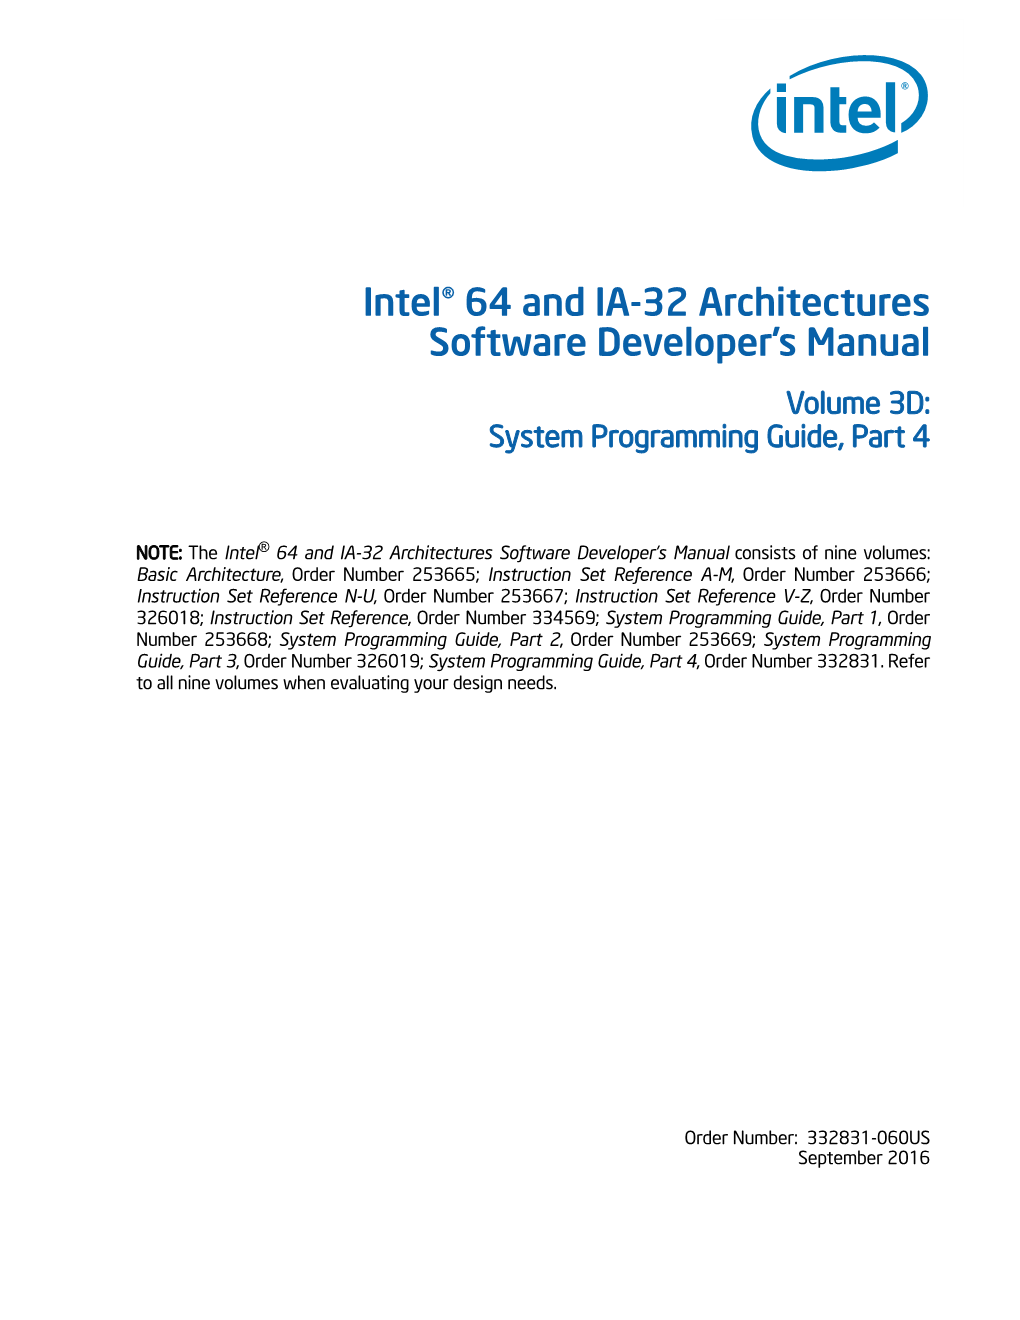 Intel® 64 and IA-32 Architectures Software Developer's Manual, Volume 3D: System Programming Guide, Part 4